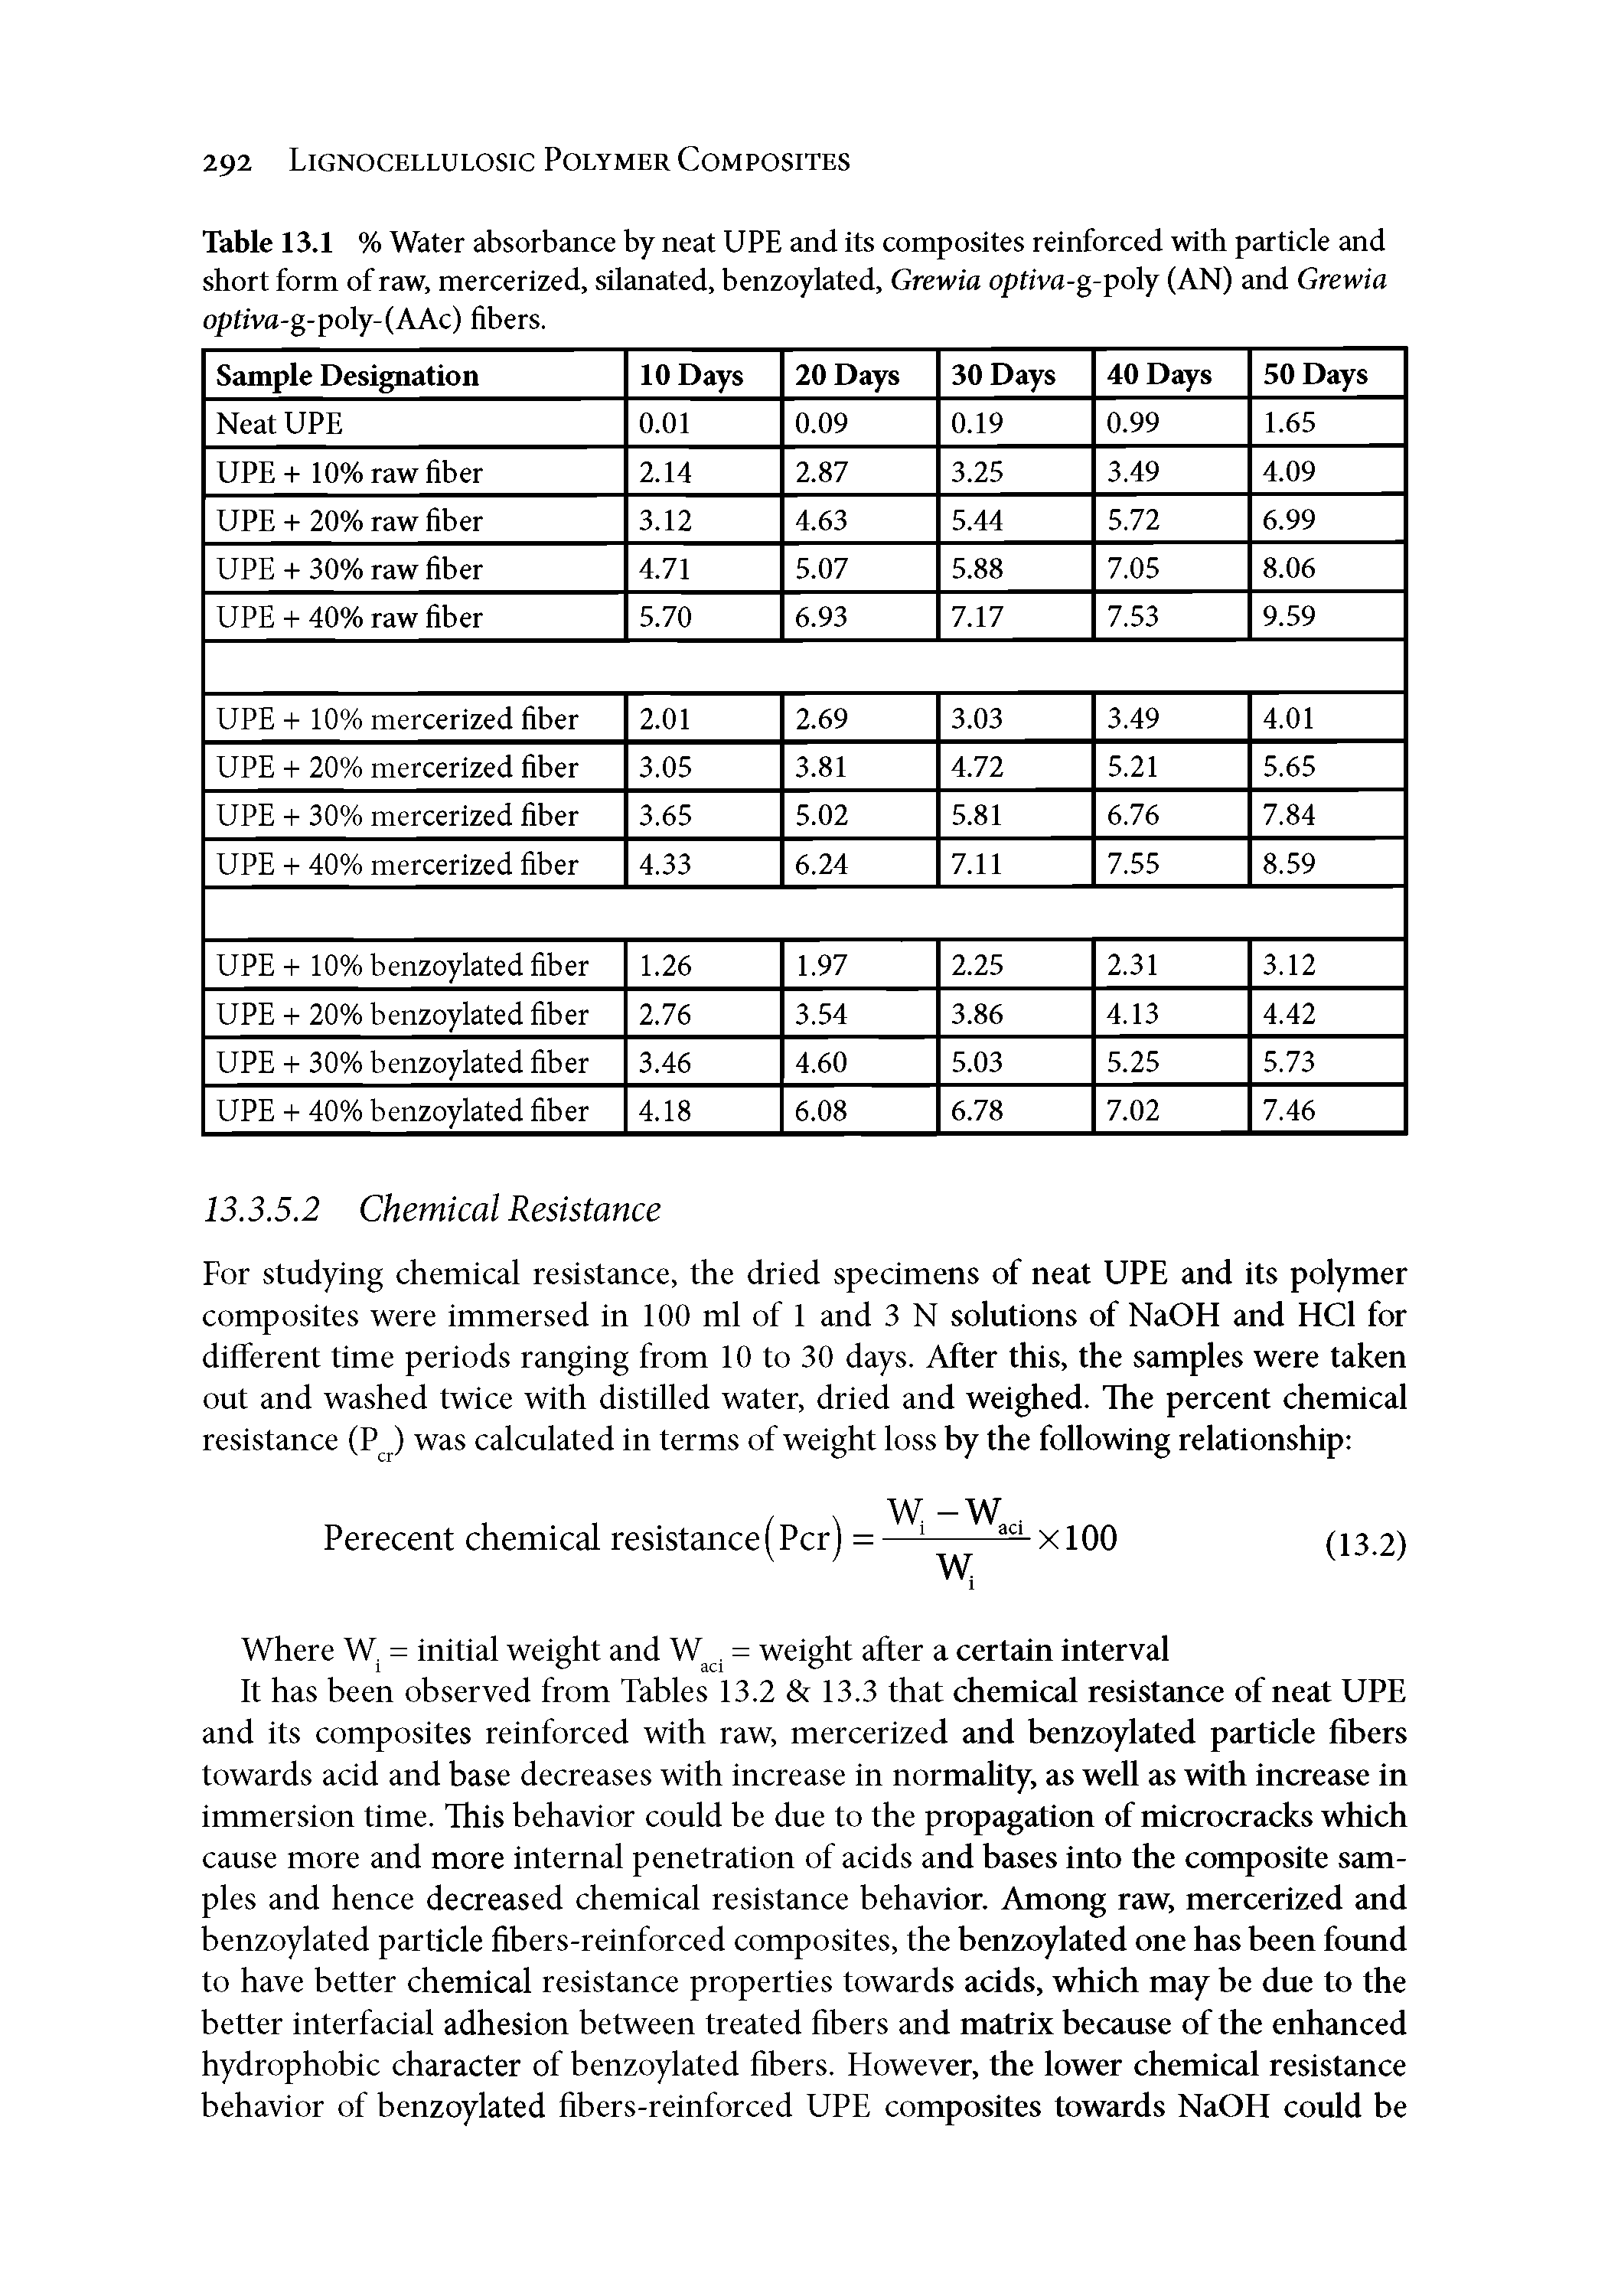 Table 13.1 % Water absorbance by neat UPE and its composites reinforced with particle and short form of raw, mercerized, silanated, benzoylated, Grewia optiva-g-poly (AN) and Grewia optivfl-g-poly-(AAc) fibers.